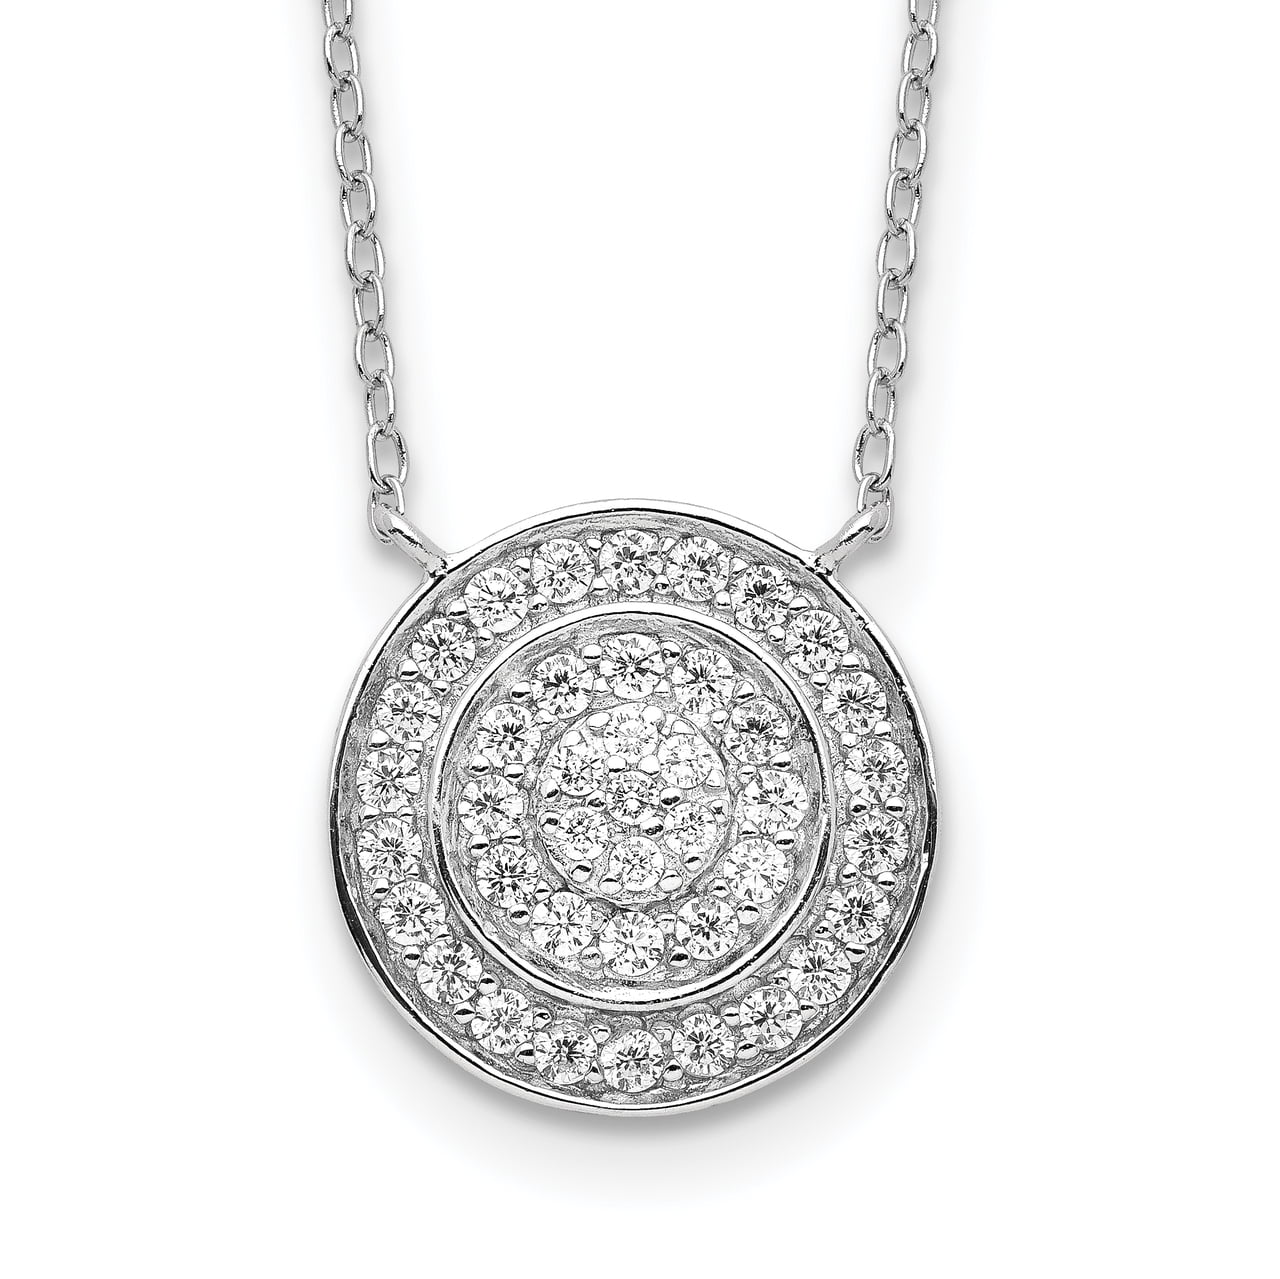 Mireval Sterling Silver on Graduation Day Disc Charm on a Sterling Silver Chain Necklace 16-20